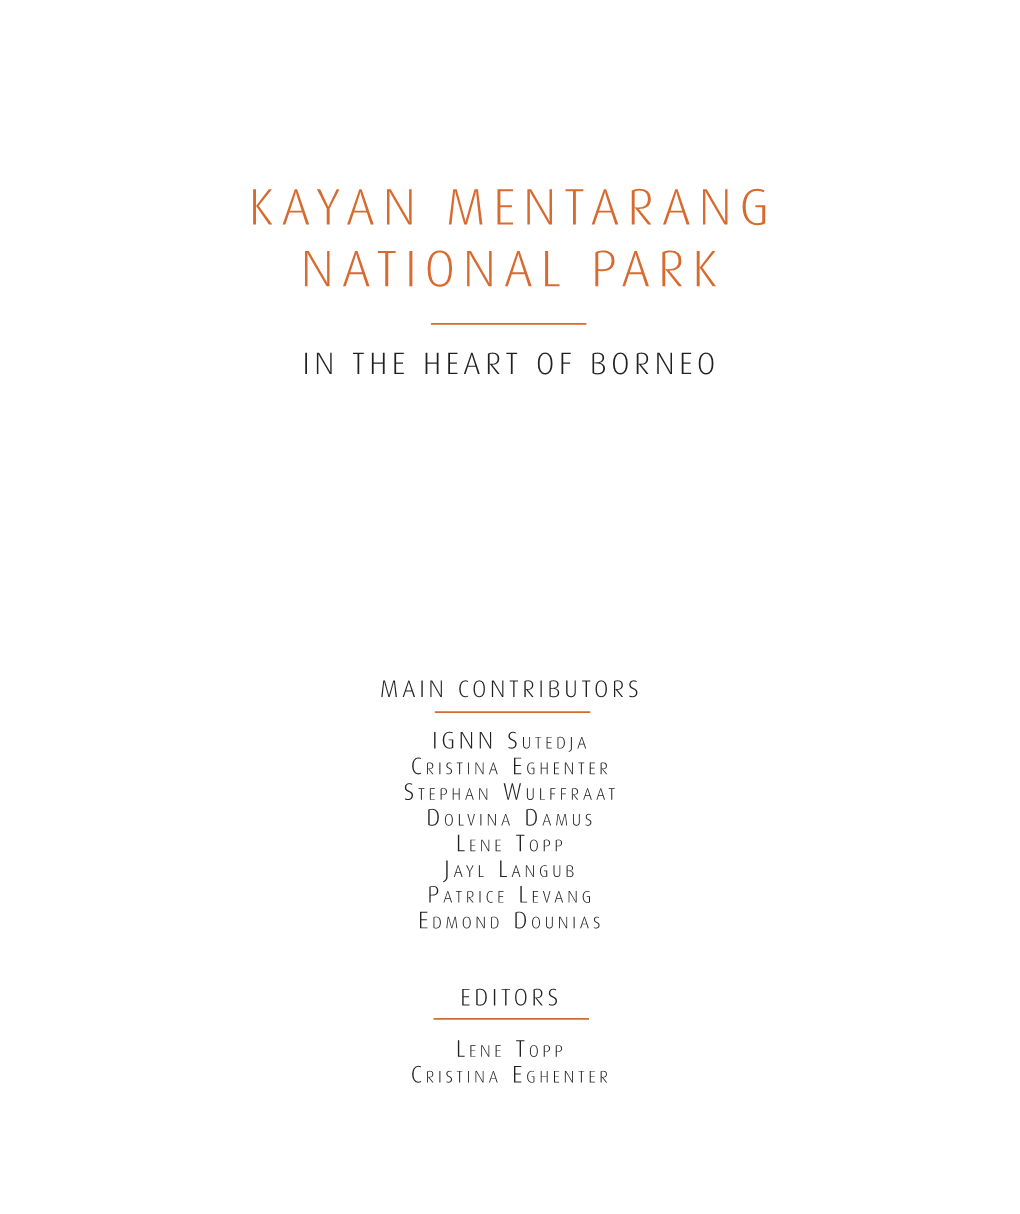 Kayan Mentarang National Park 3 20 Different Perspectives and Lessons Learned